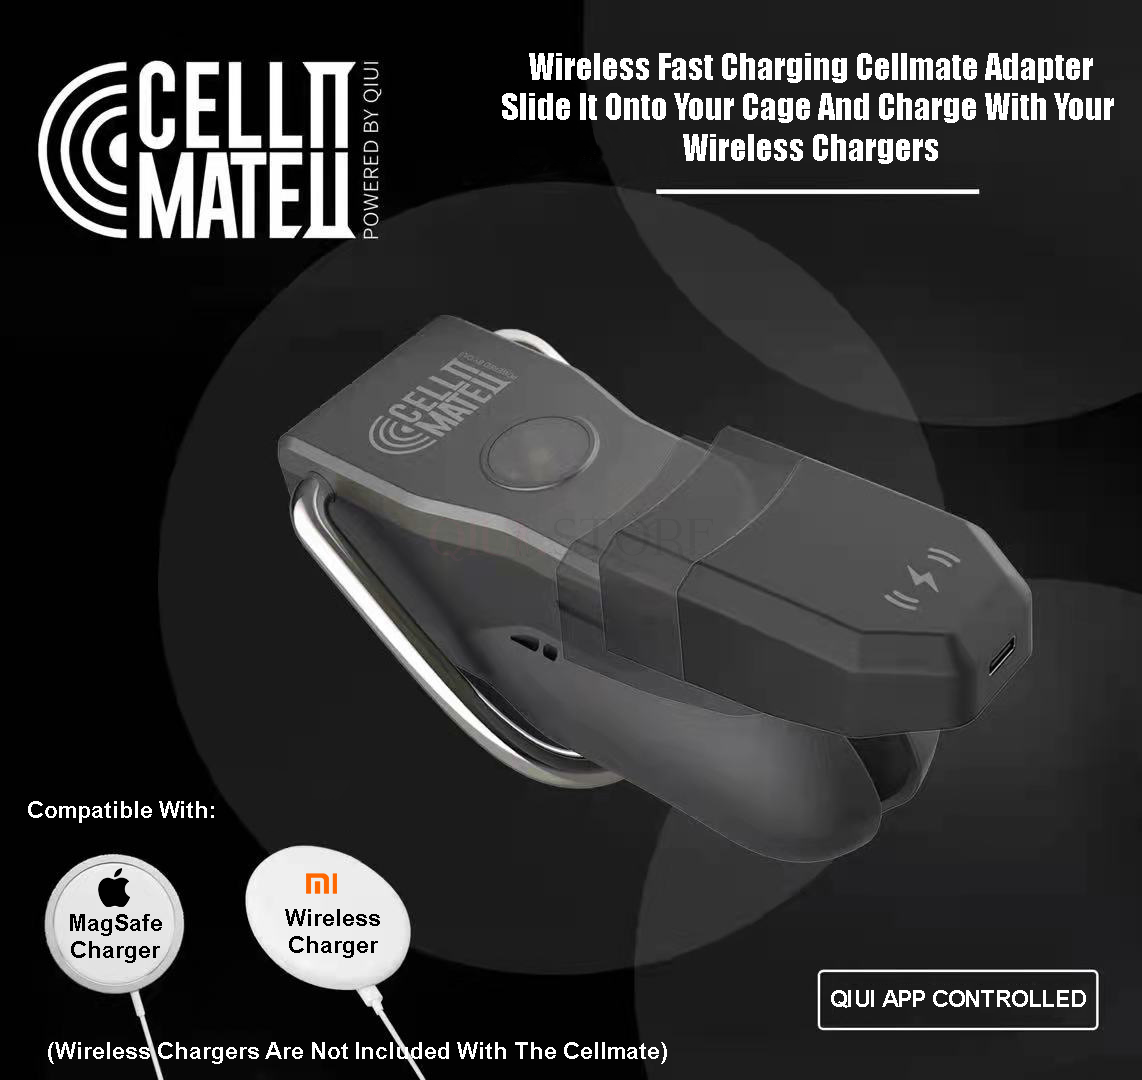 Bluetooth Cellmate Chastity Cage Feedback